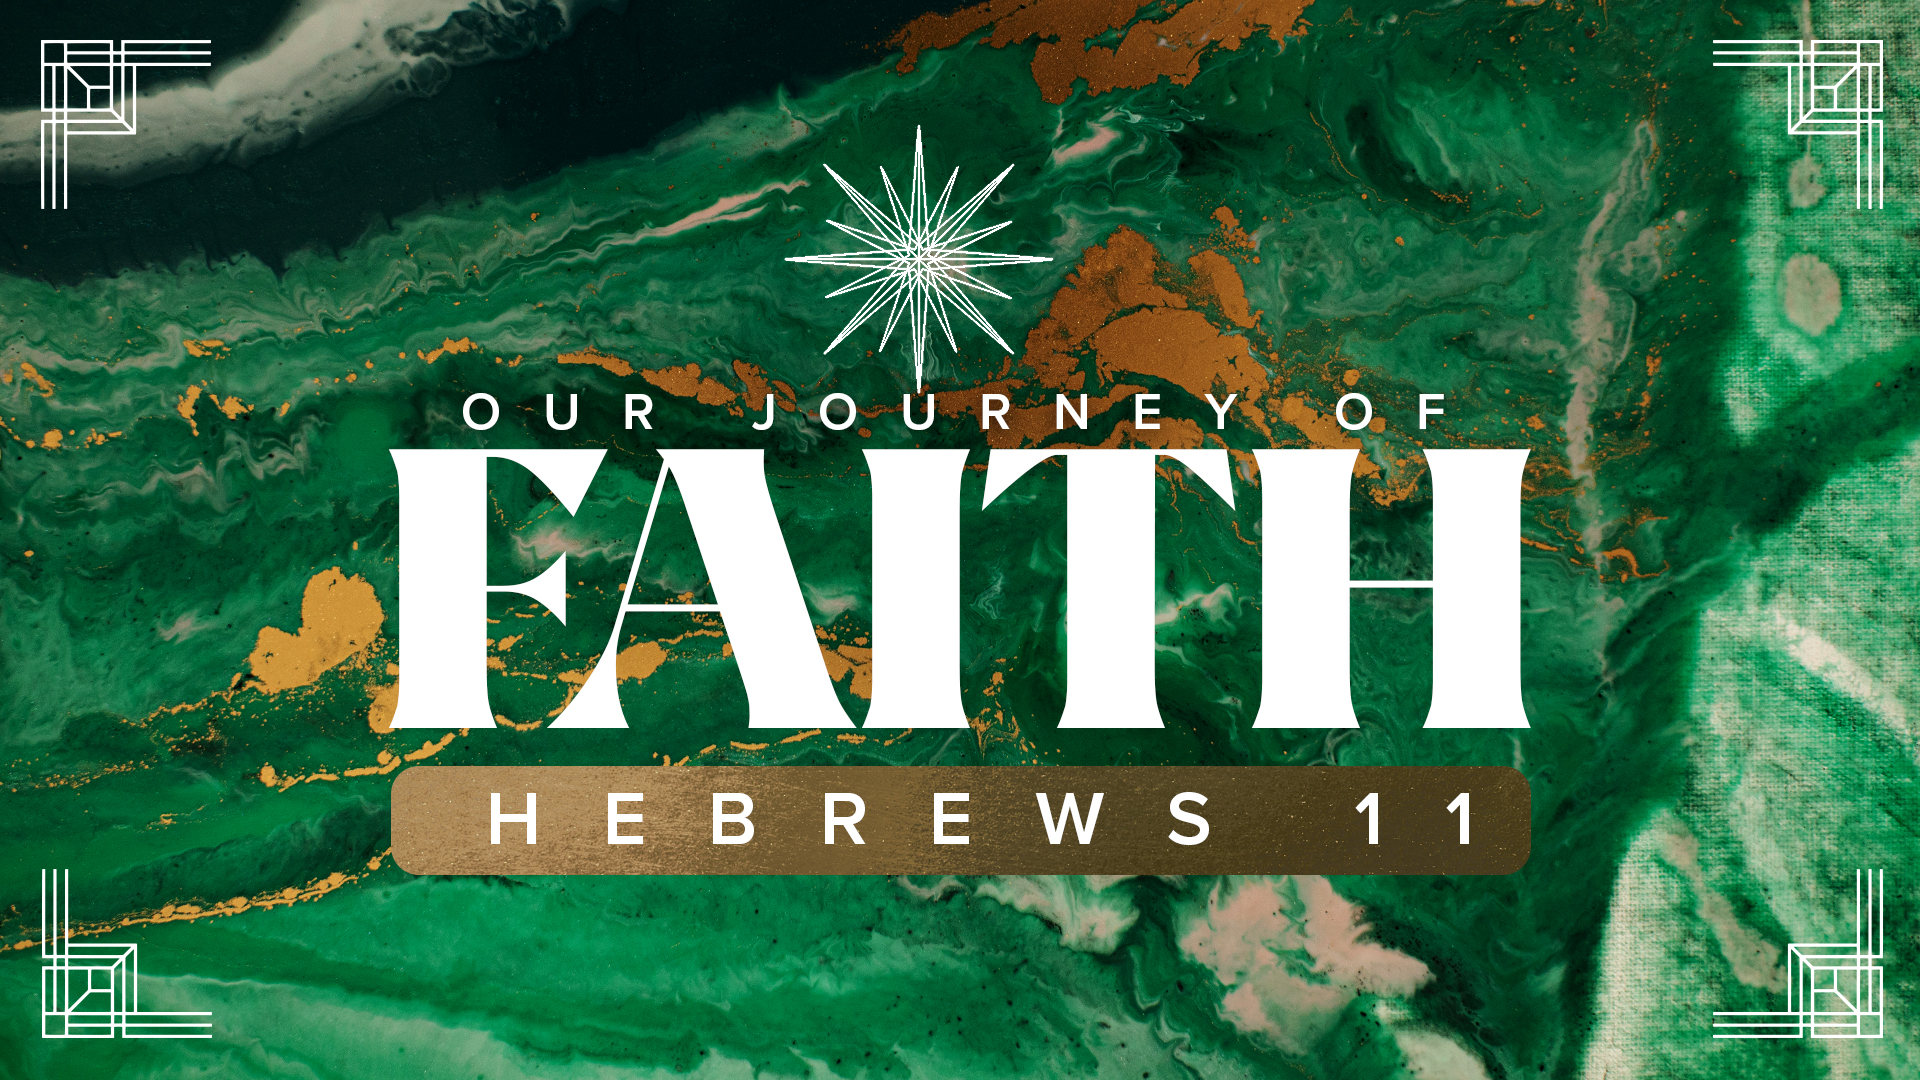 Hebrews 11:30-40: Uncommon Heroes of the Faith (Our Journey of Faith)